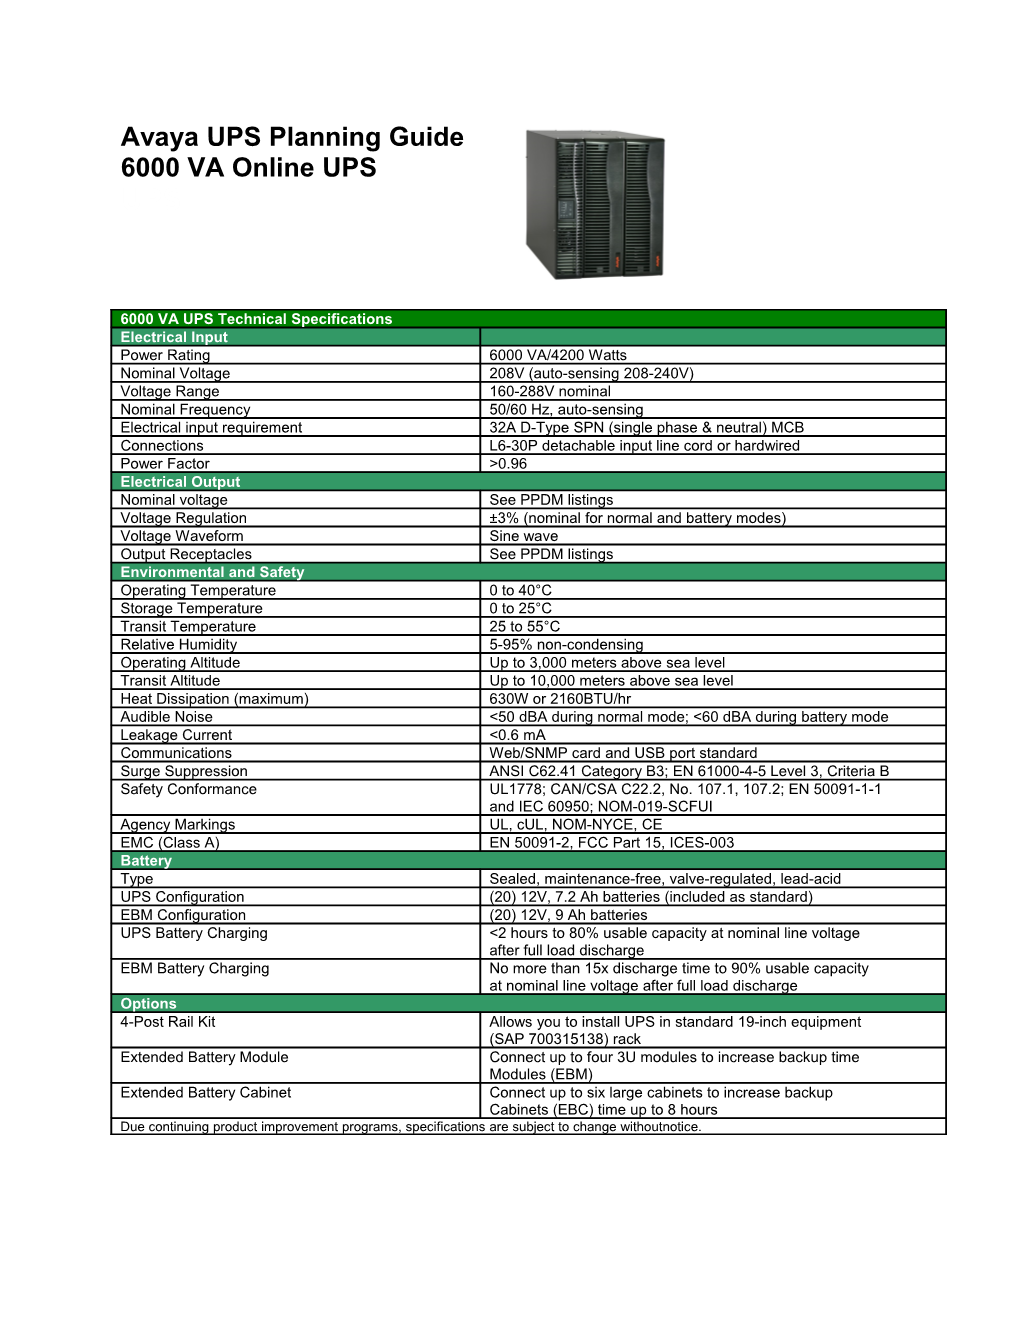 UPS Product Information